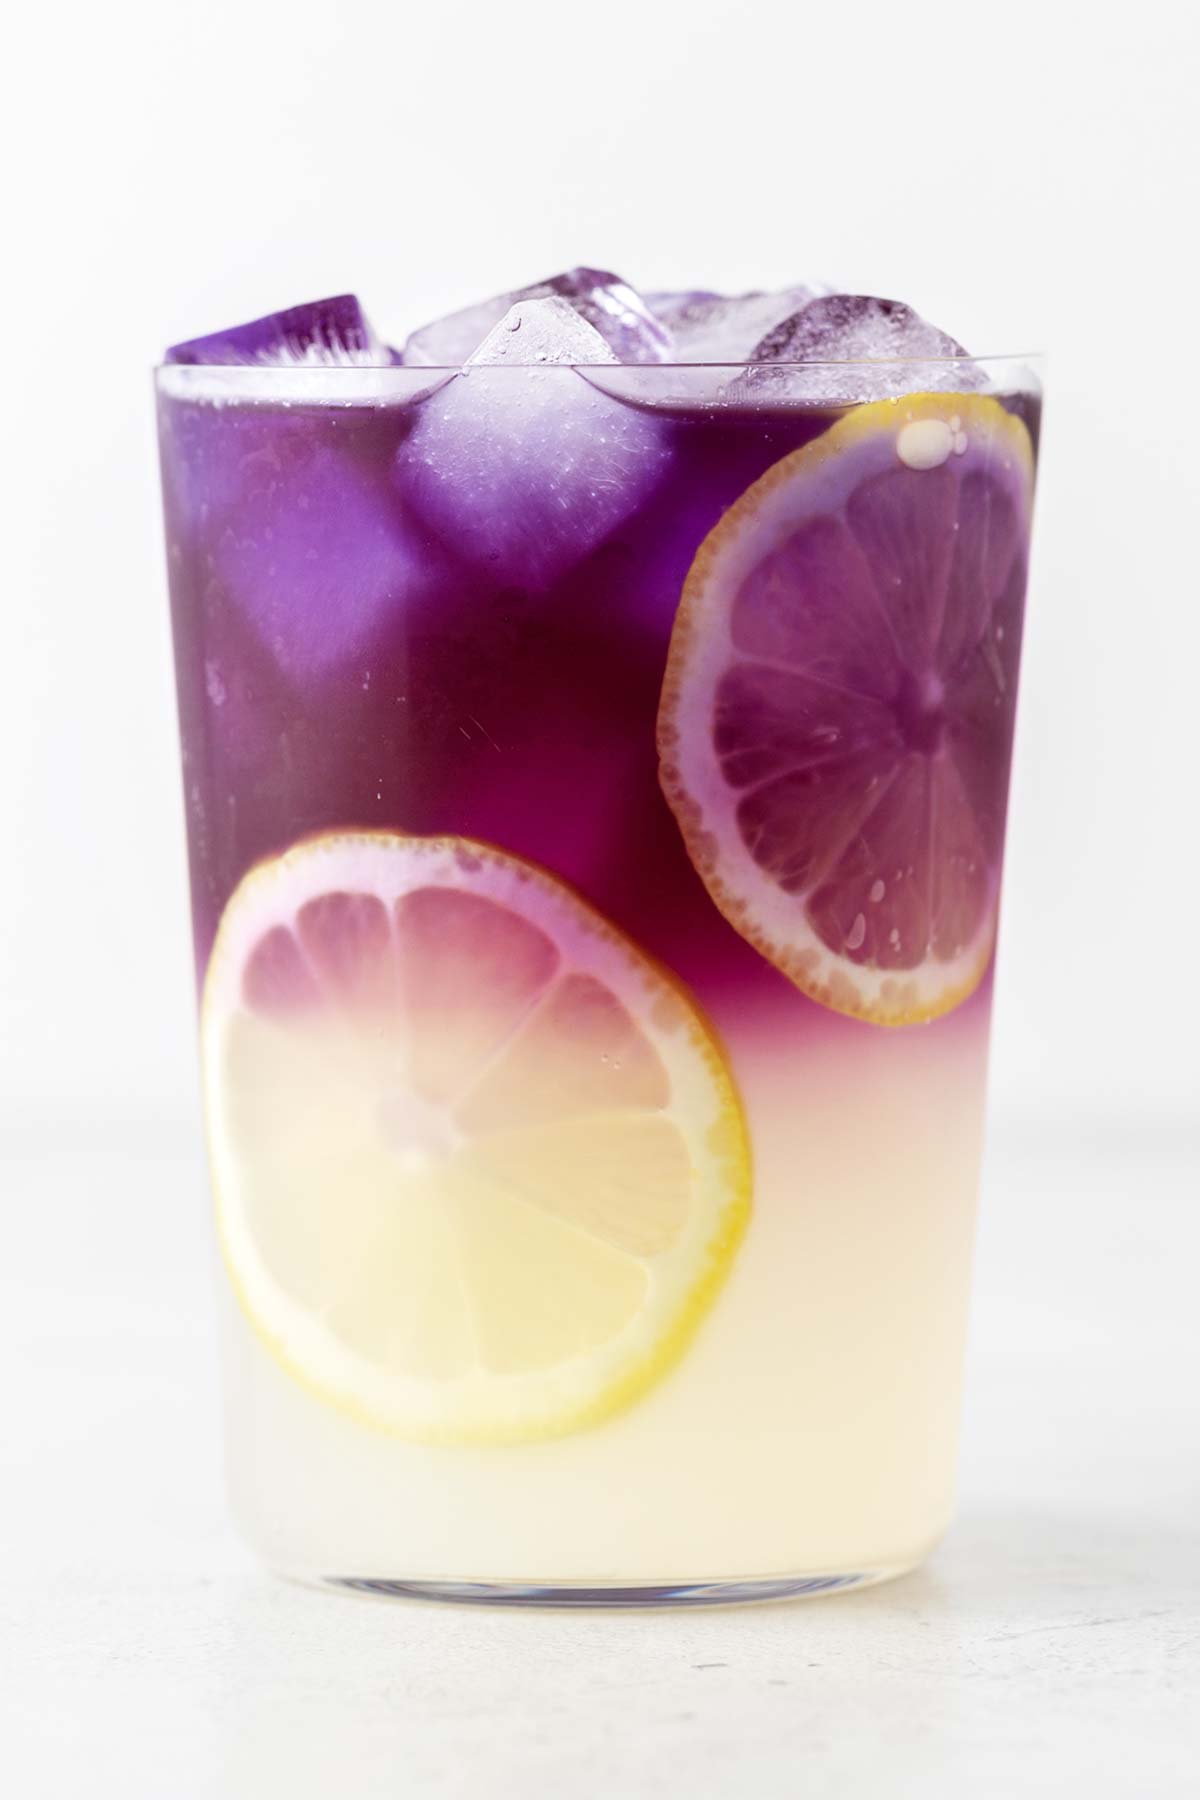 Butterfly Pea Flower Lemonade in a glass garnished with lemon slices.